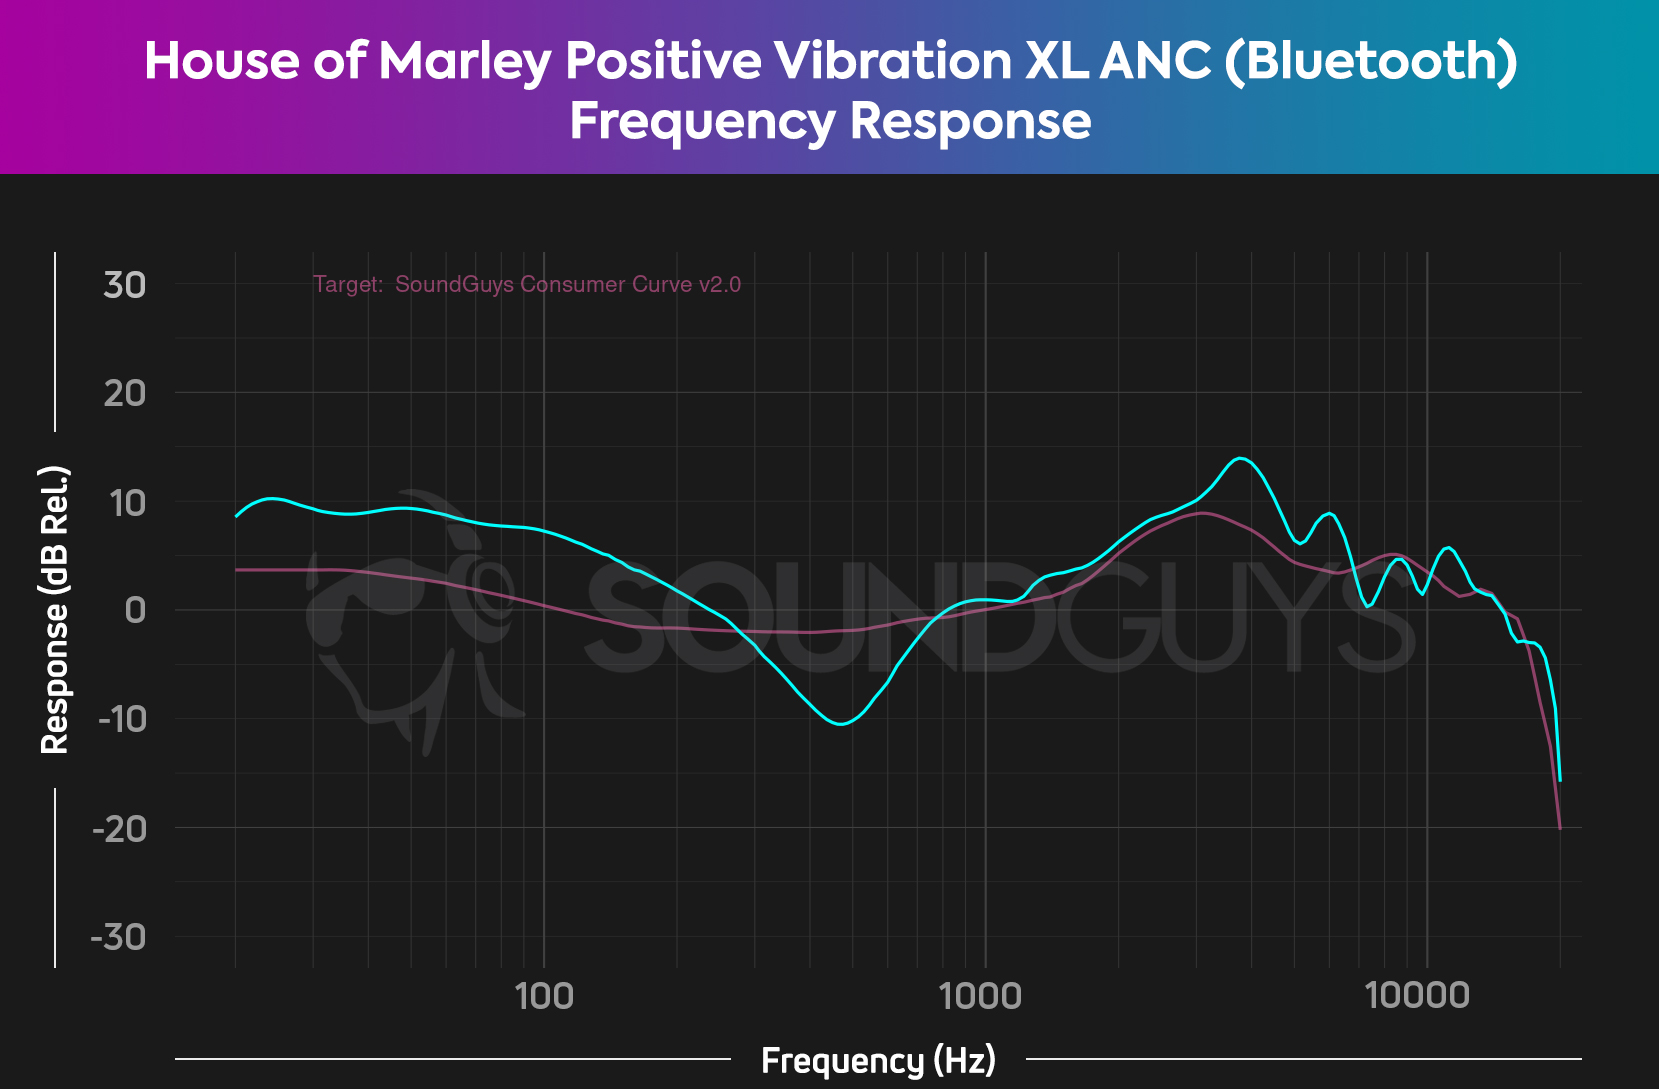 Chart shows House of Marley Positive Vibration XL ANC Bluetooth frequency response compared to our target curve.